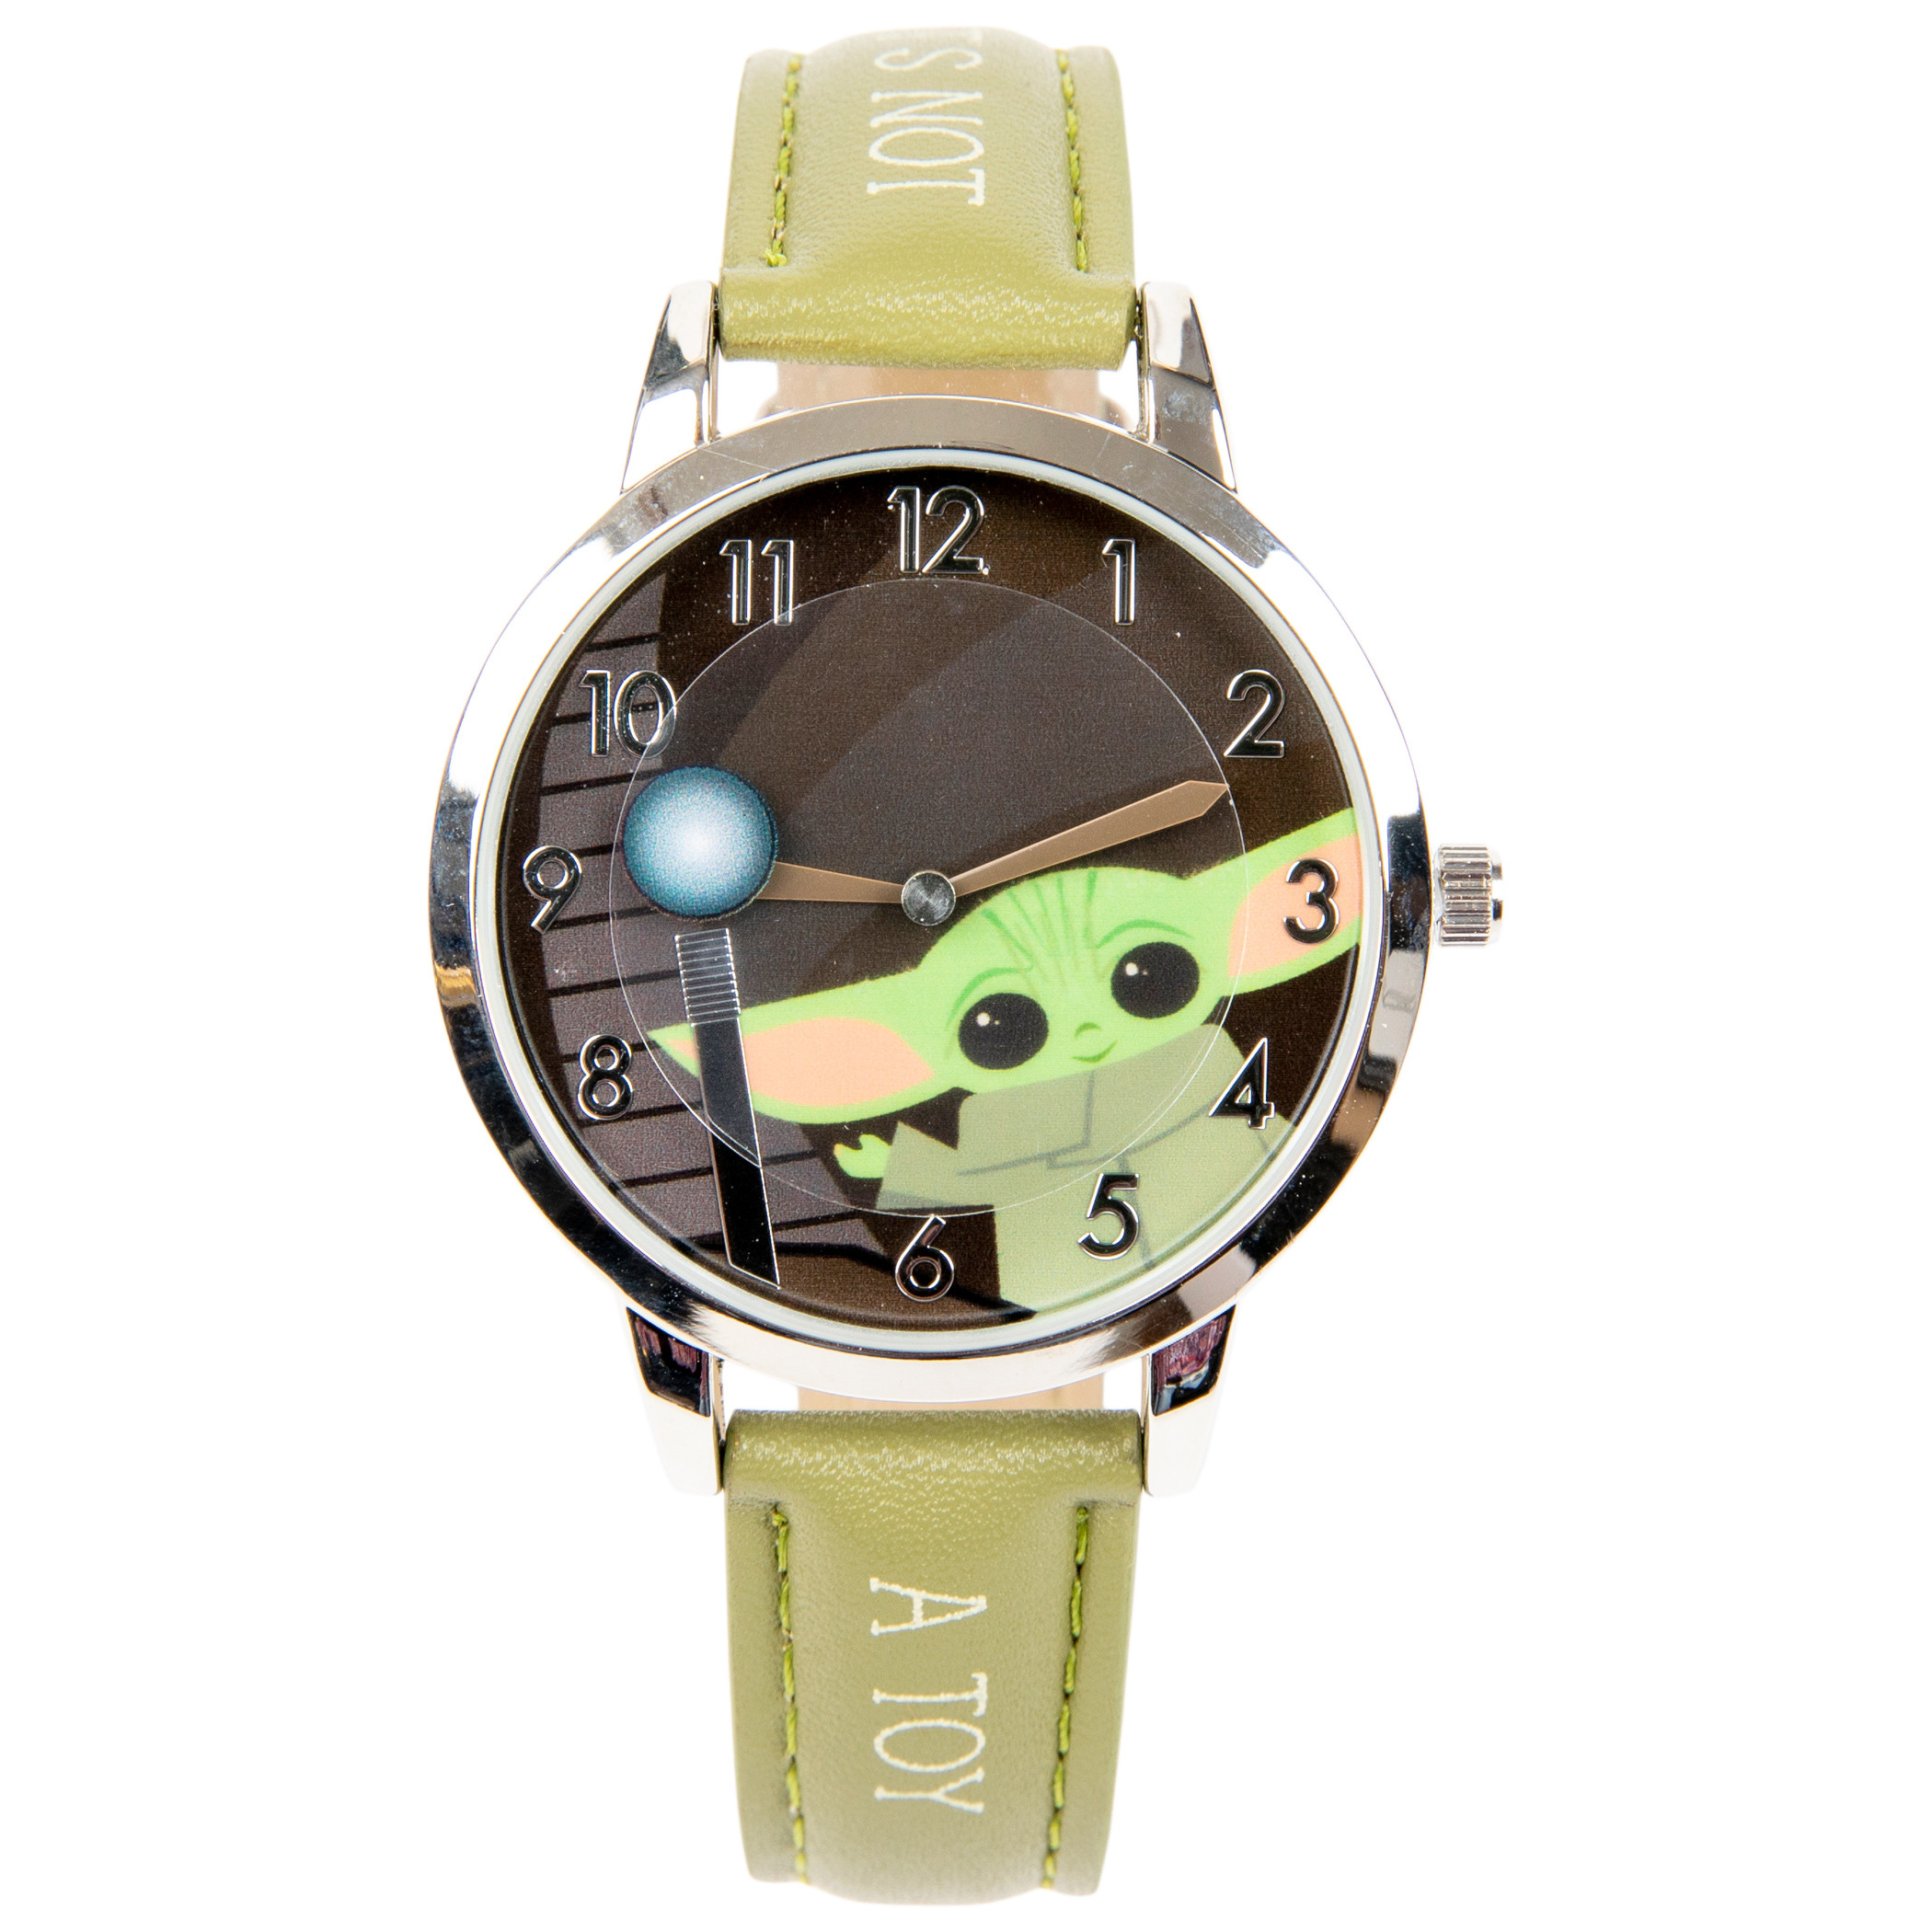 Star Wars Mandalorian The Child Its Not A Toy Rotating Disk Watch